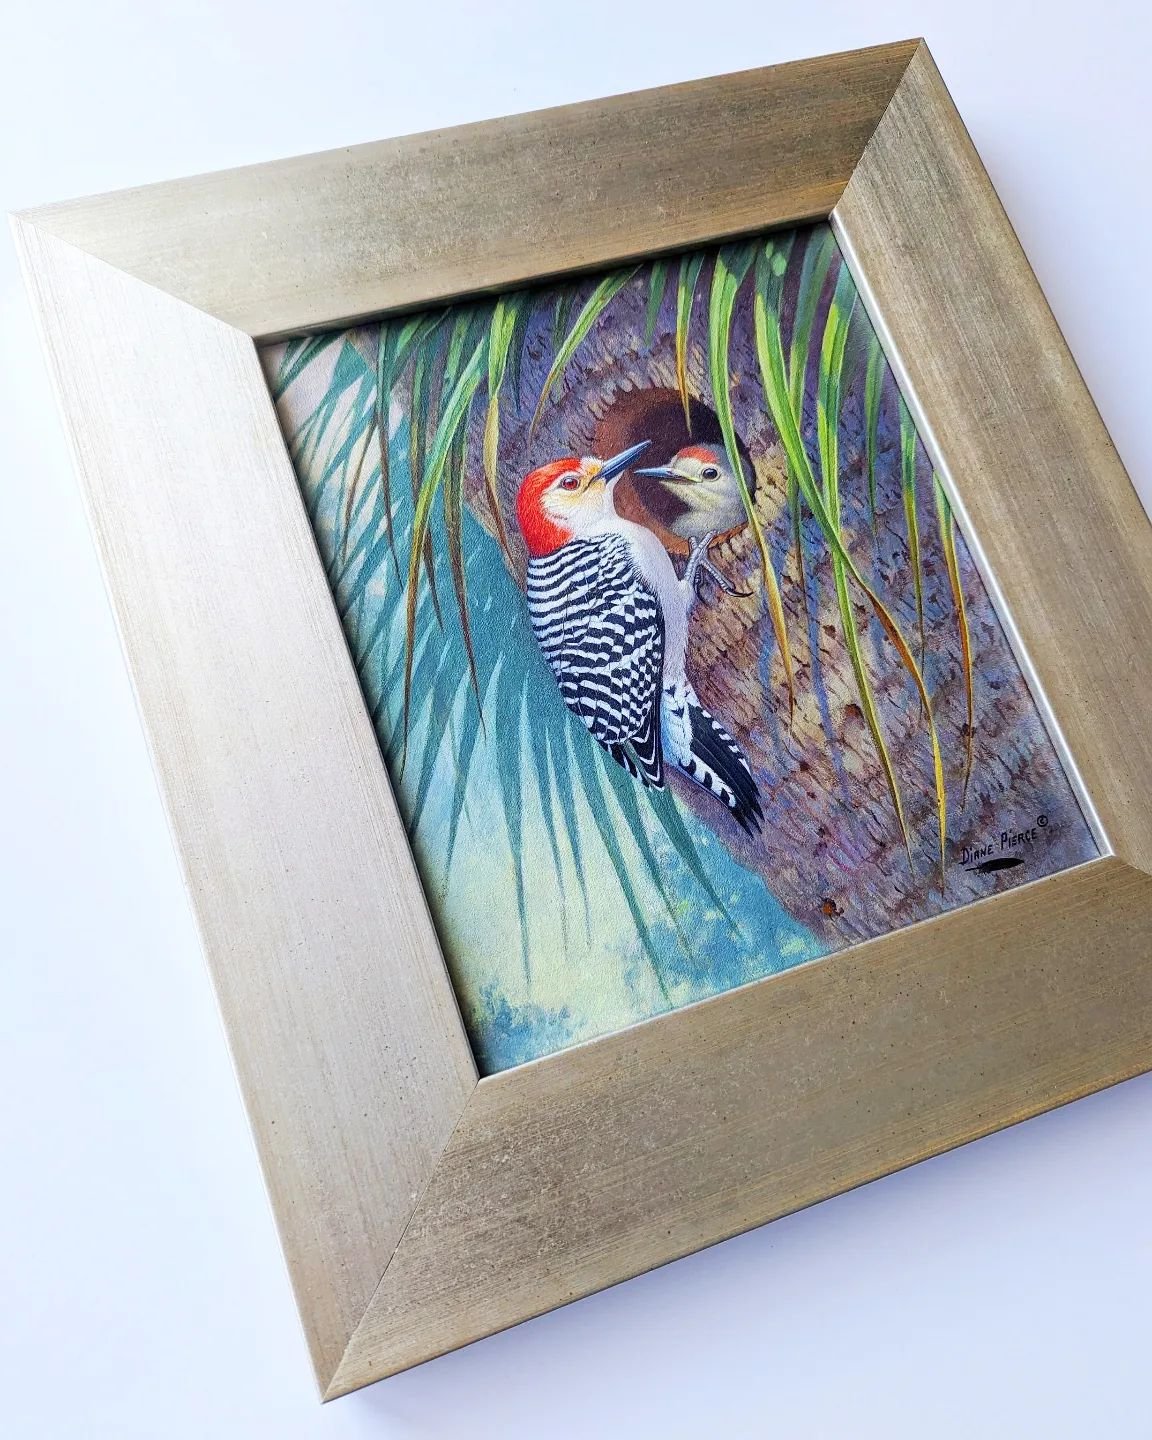 Lovely little woodpecker painting with a wide, contemporary moulding from Engelsen Frame. The warm silver finish looks great with the painting's tropical color palette.
.
.
.
.
.
#thegiltcomplex #customframıng #fineartframing #fineartpainting #finear